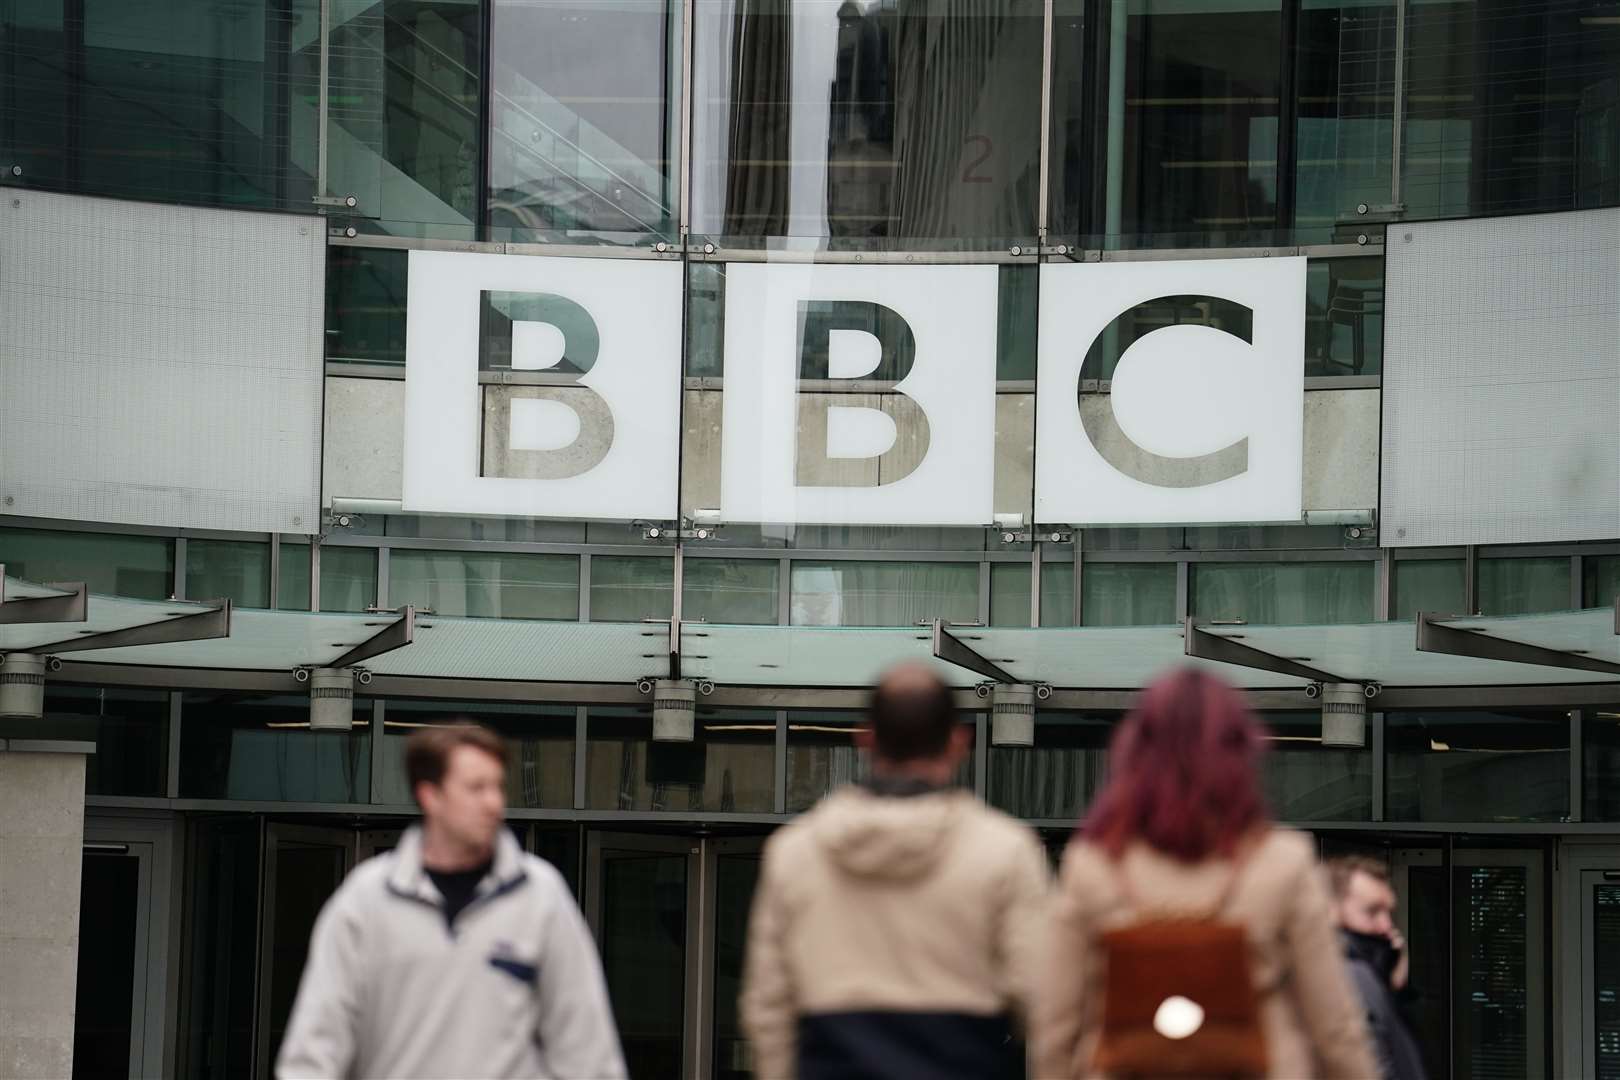 The BBC was among those targeted by the hackers (Jordan Pettitt/PA)